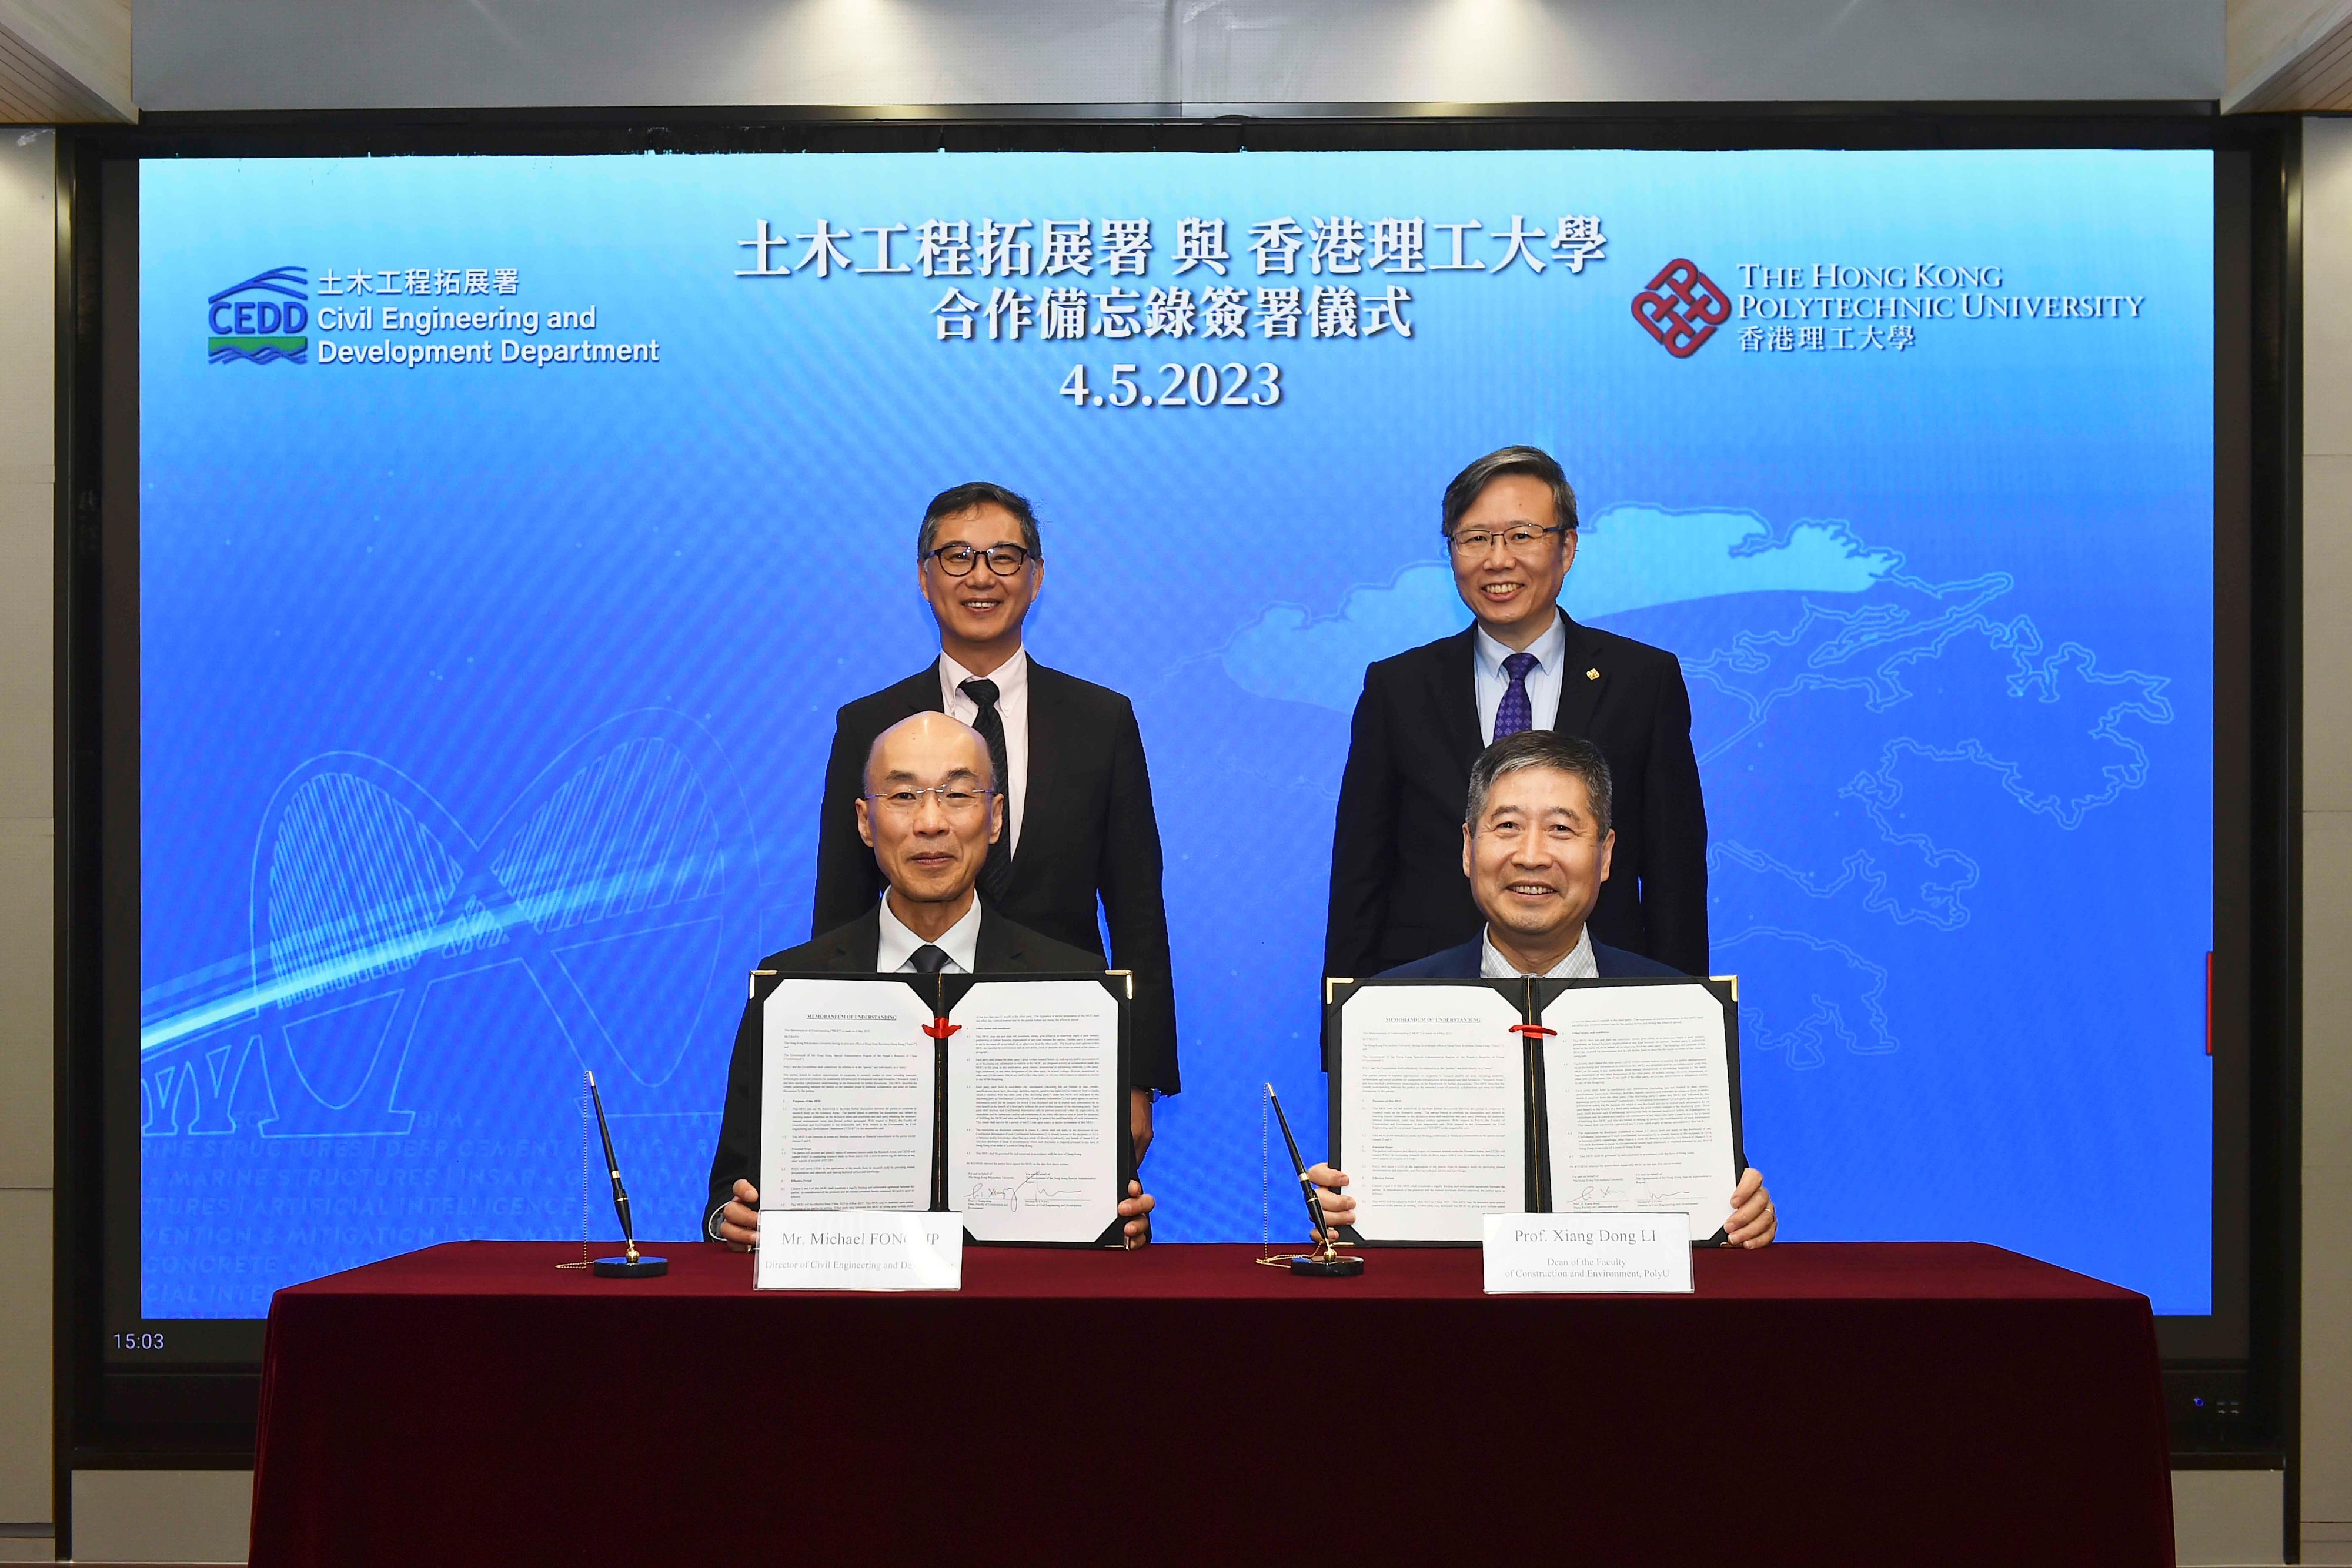 The Civil Engineering and Development Department and The Hong Kong Polytechnic University (PolyU) signed a Memorandum of Understanding (MoU) on research studies for sustainable infrastructure development and land formation today (May 4). Photo shows the Director of the Civil Engineering and Development, Mr Michael Fong (front row, left), and the Dean of the Faculty of Construction and Environment of PolyU, Professor Li Xiangdong (front row, right), signing the MoU as witnessed by the Permanent Secretary for Development (Works) of the Development Bureau, Mr Ricky Lau (back row, left), and the President of PolyU, Professor Teng Jin-Guang (back row, right).